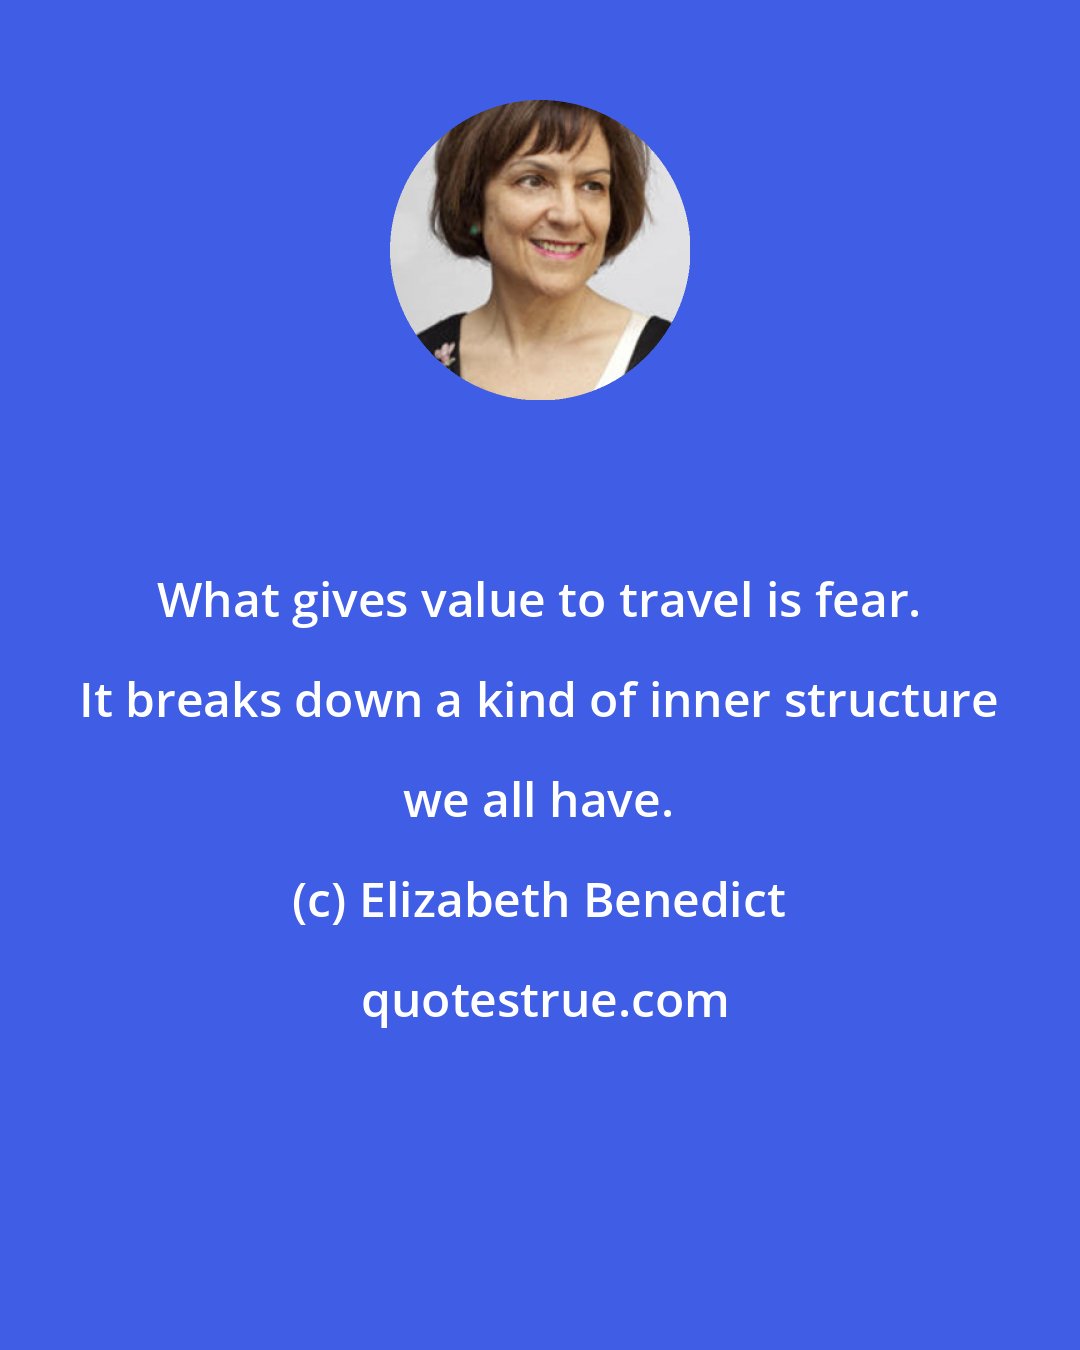 Elizabeth Benedict: What gives value to travel is fear. It breaks down a kind of inner structure we all have.